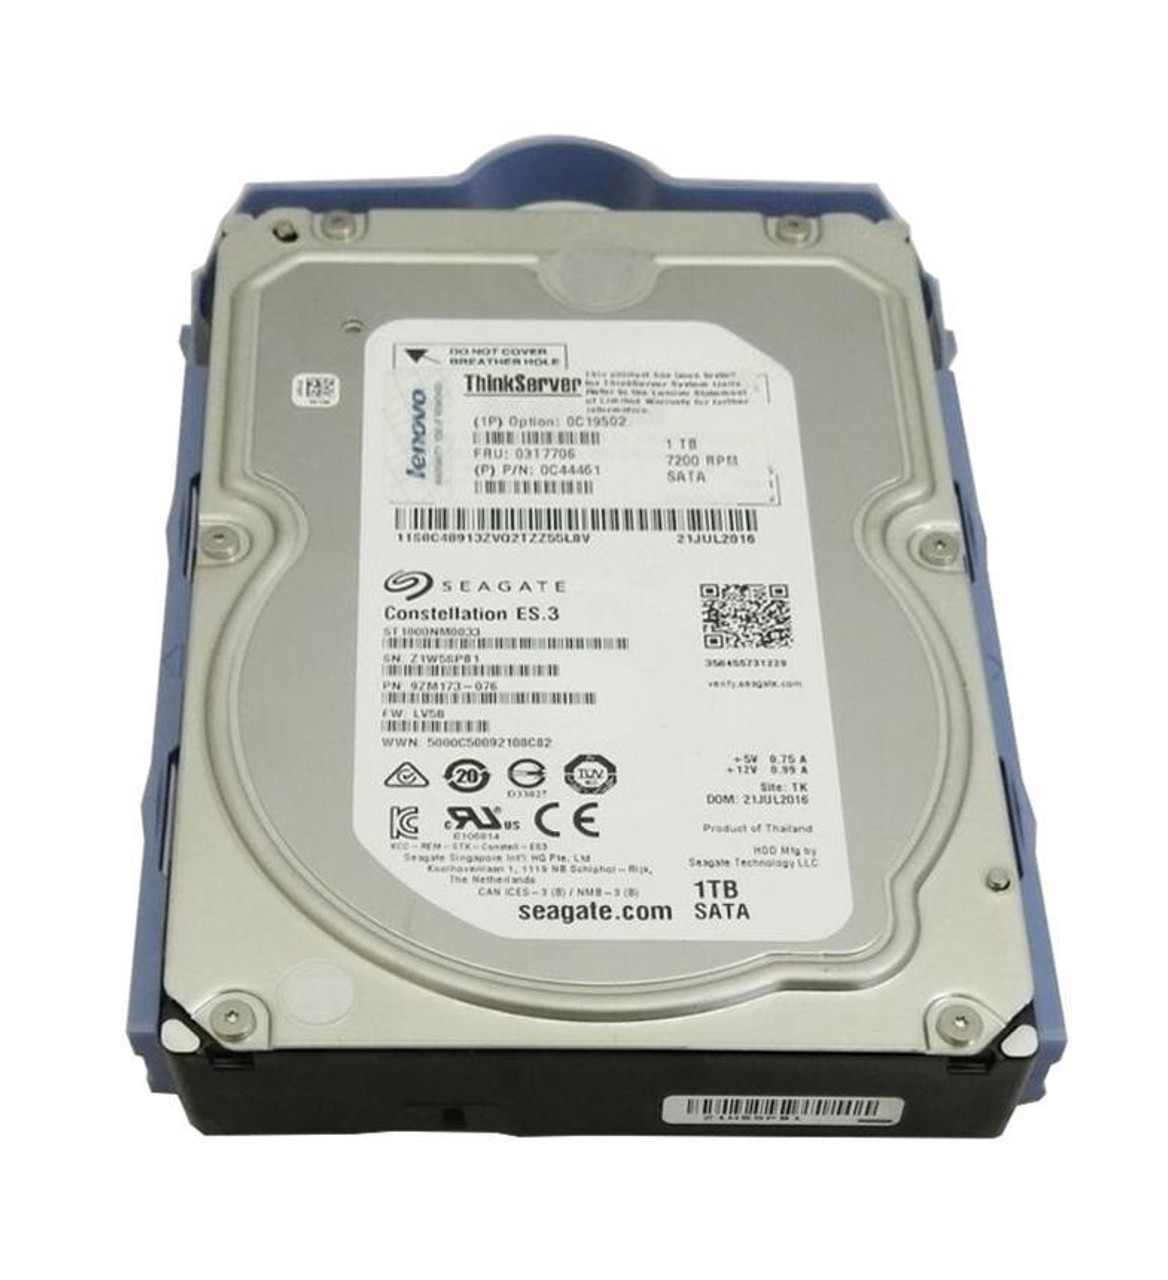 0C19502-06 Lenovo 1TB 7200RPM SATA 6Gbps Hot Swap 64MB Cache 3.5-inch Internal Hard Drive for ThinkServer TS140 and TS440